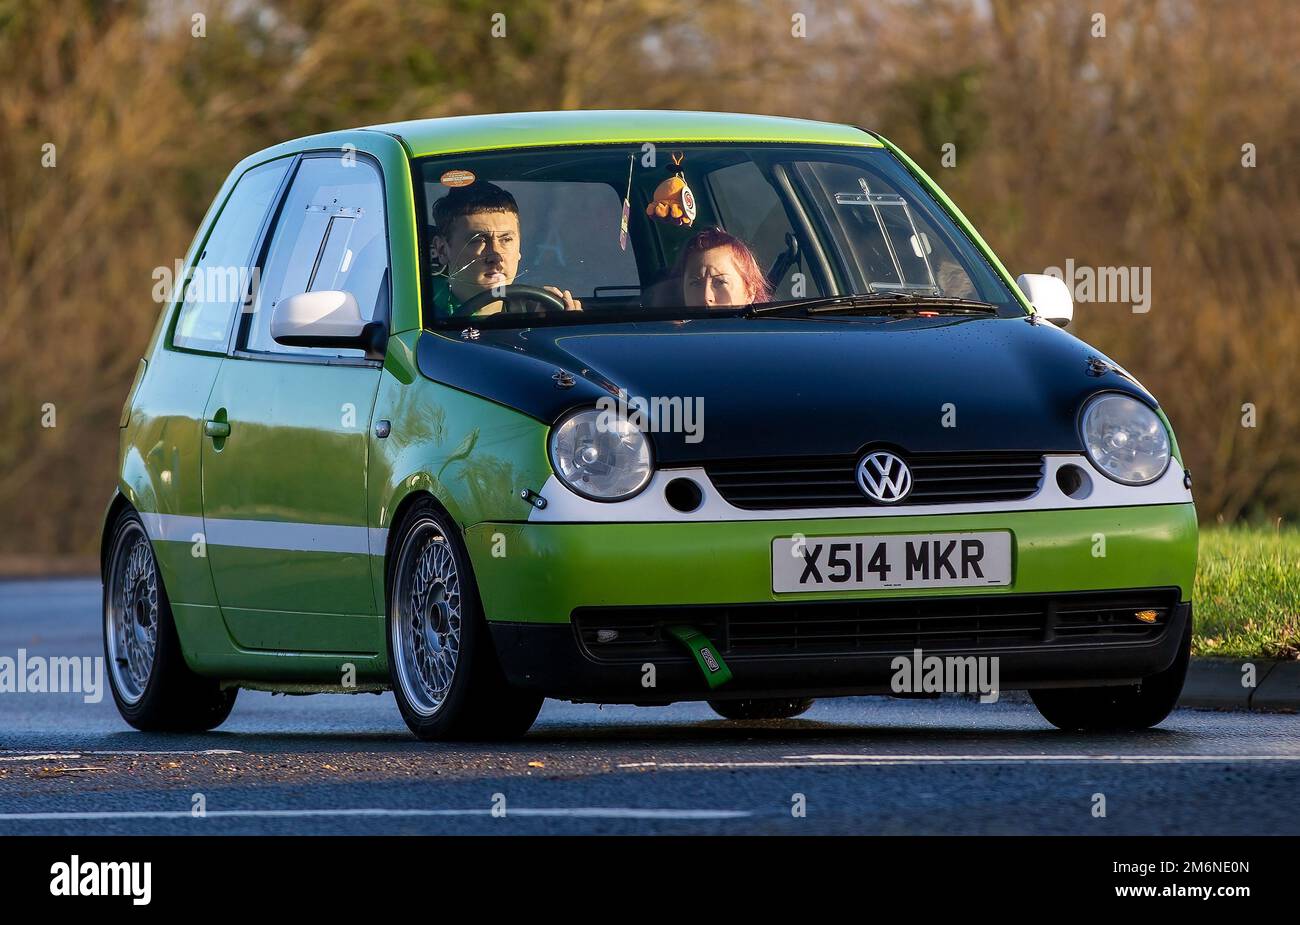 2000 green Volkswagen Lupo classic car Stock Photo